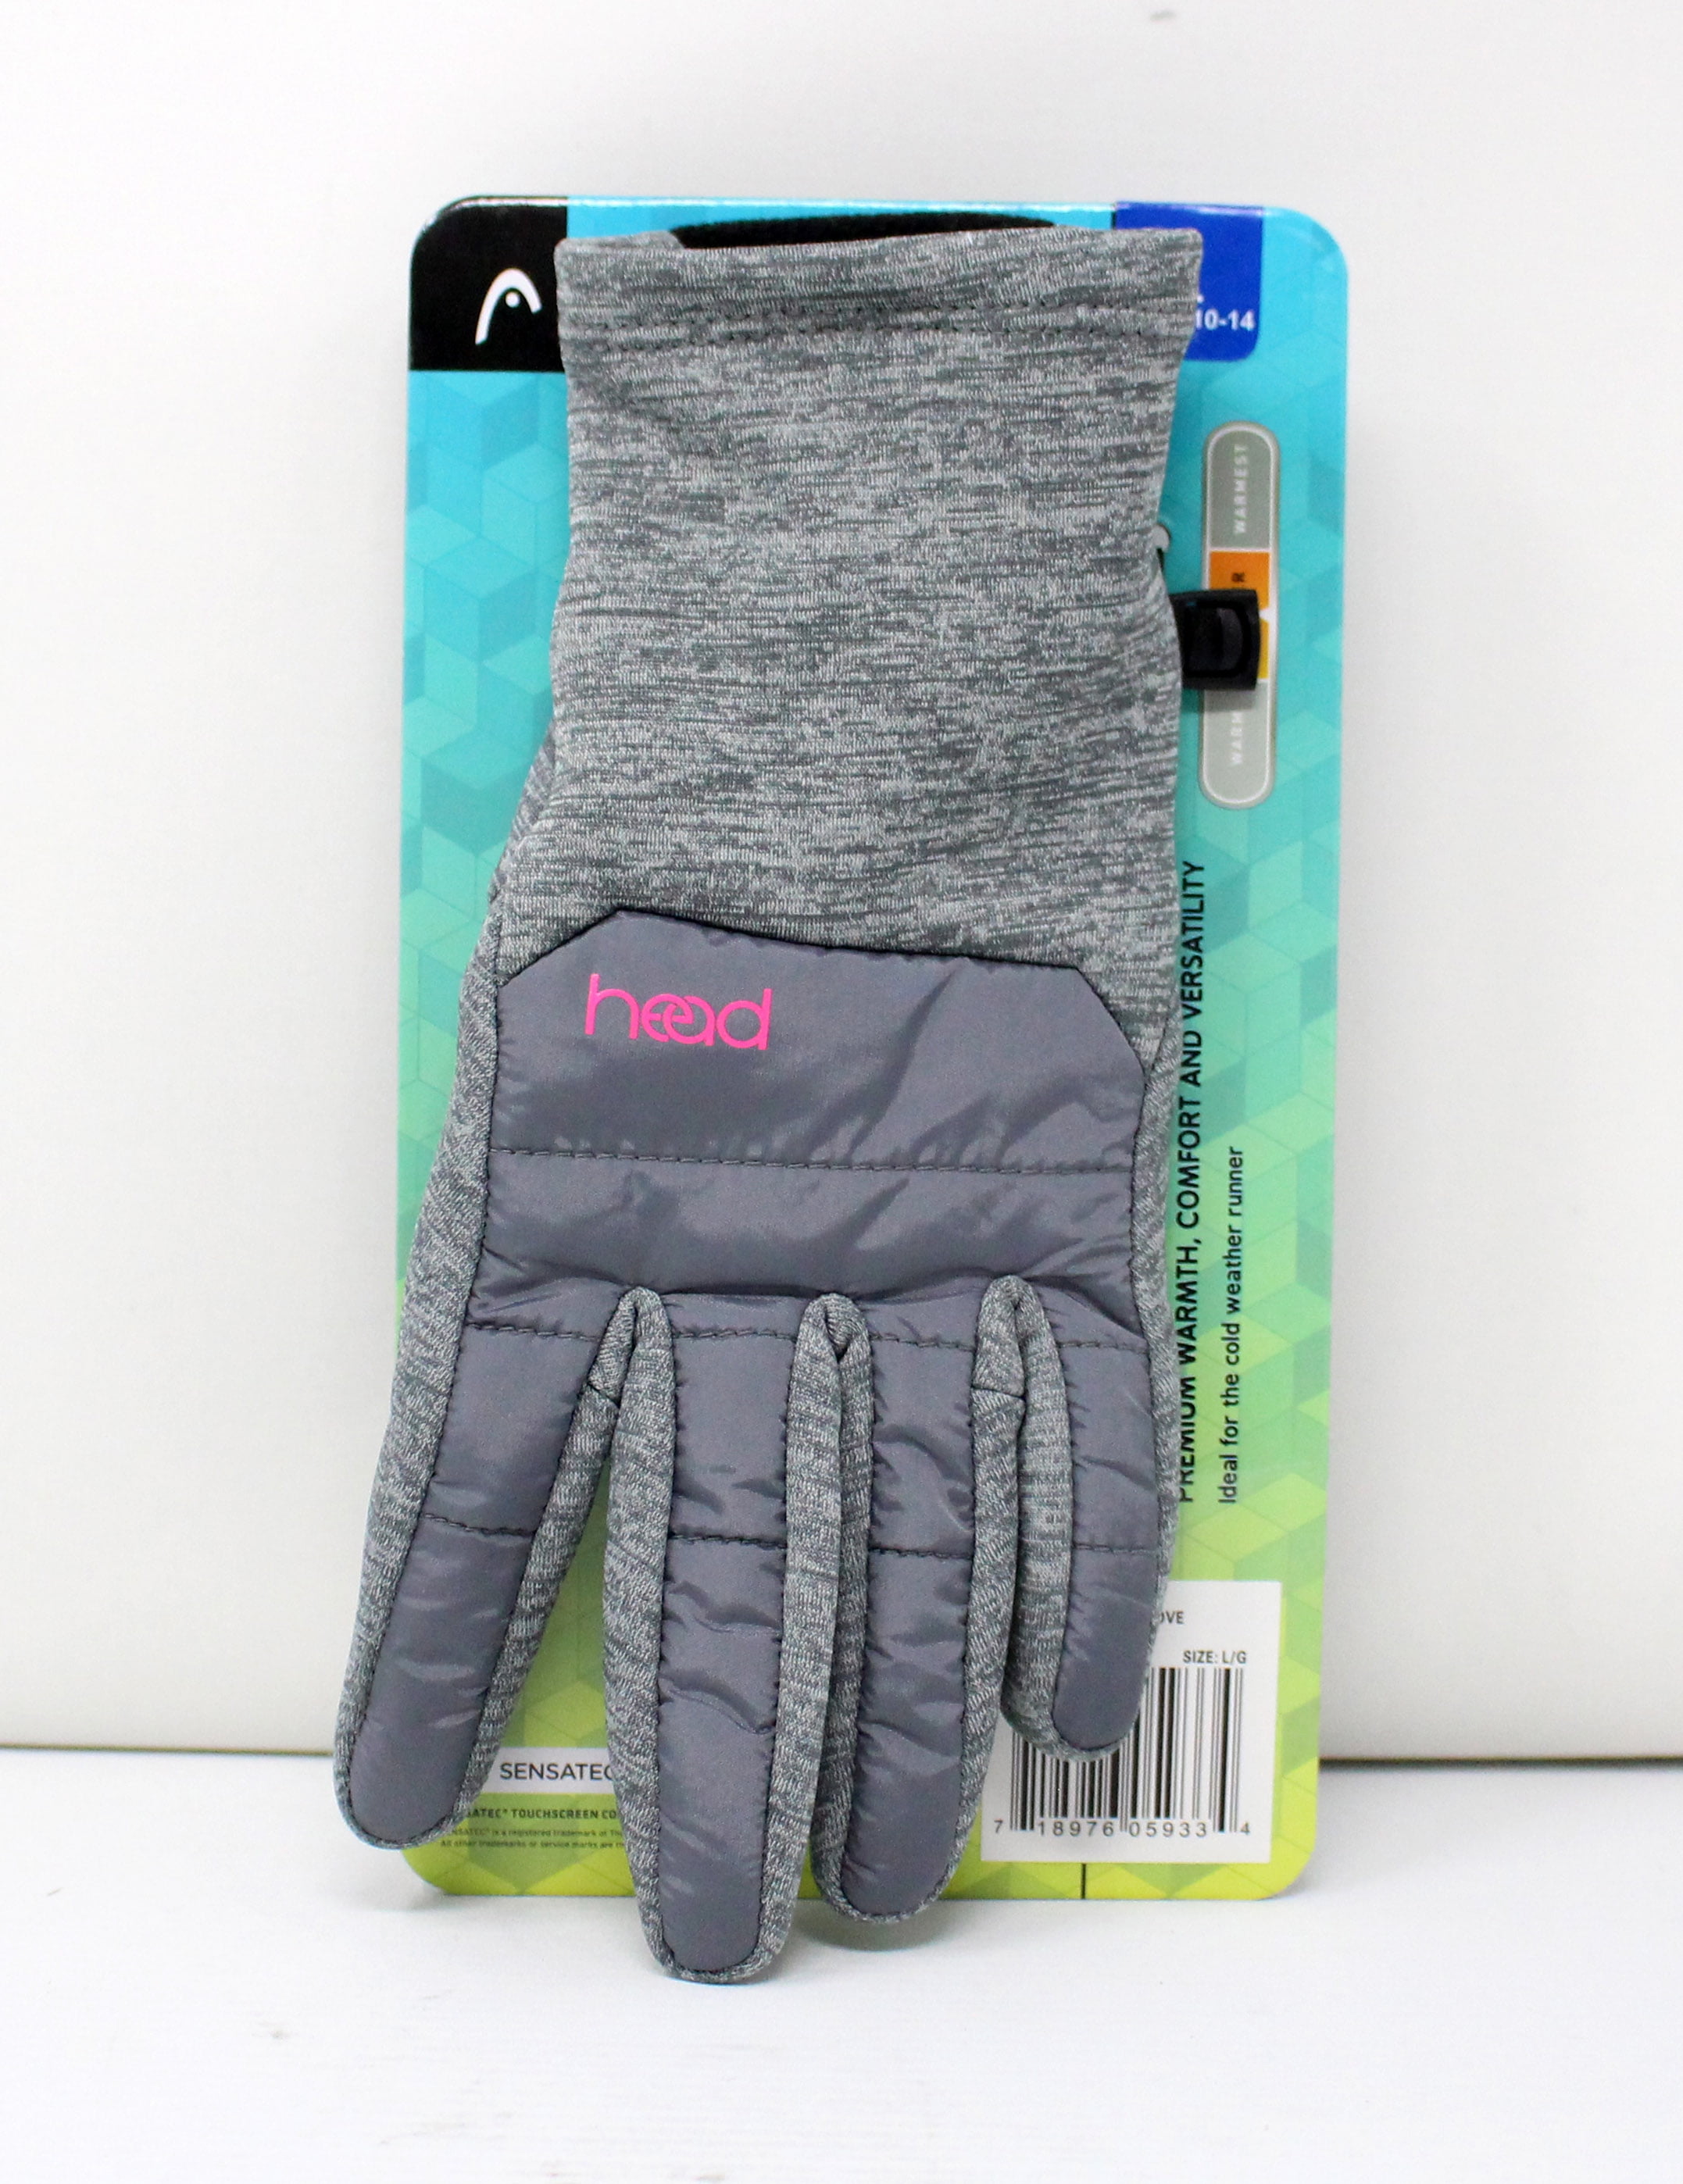 HEAD Junior Hibrid Gloves & Mittens Size S Age 4 to 6 for sale online 